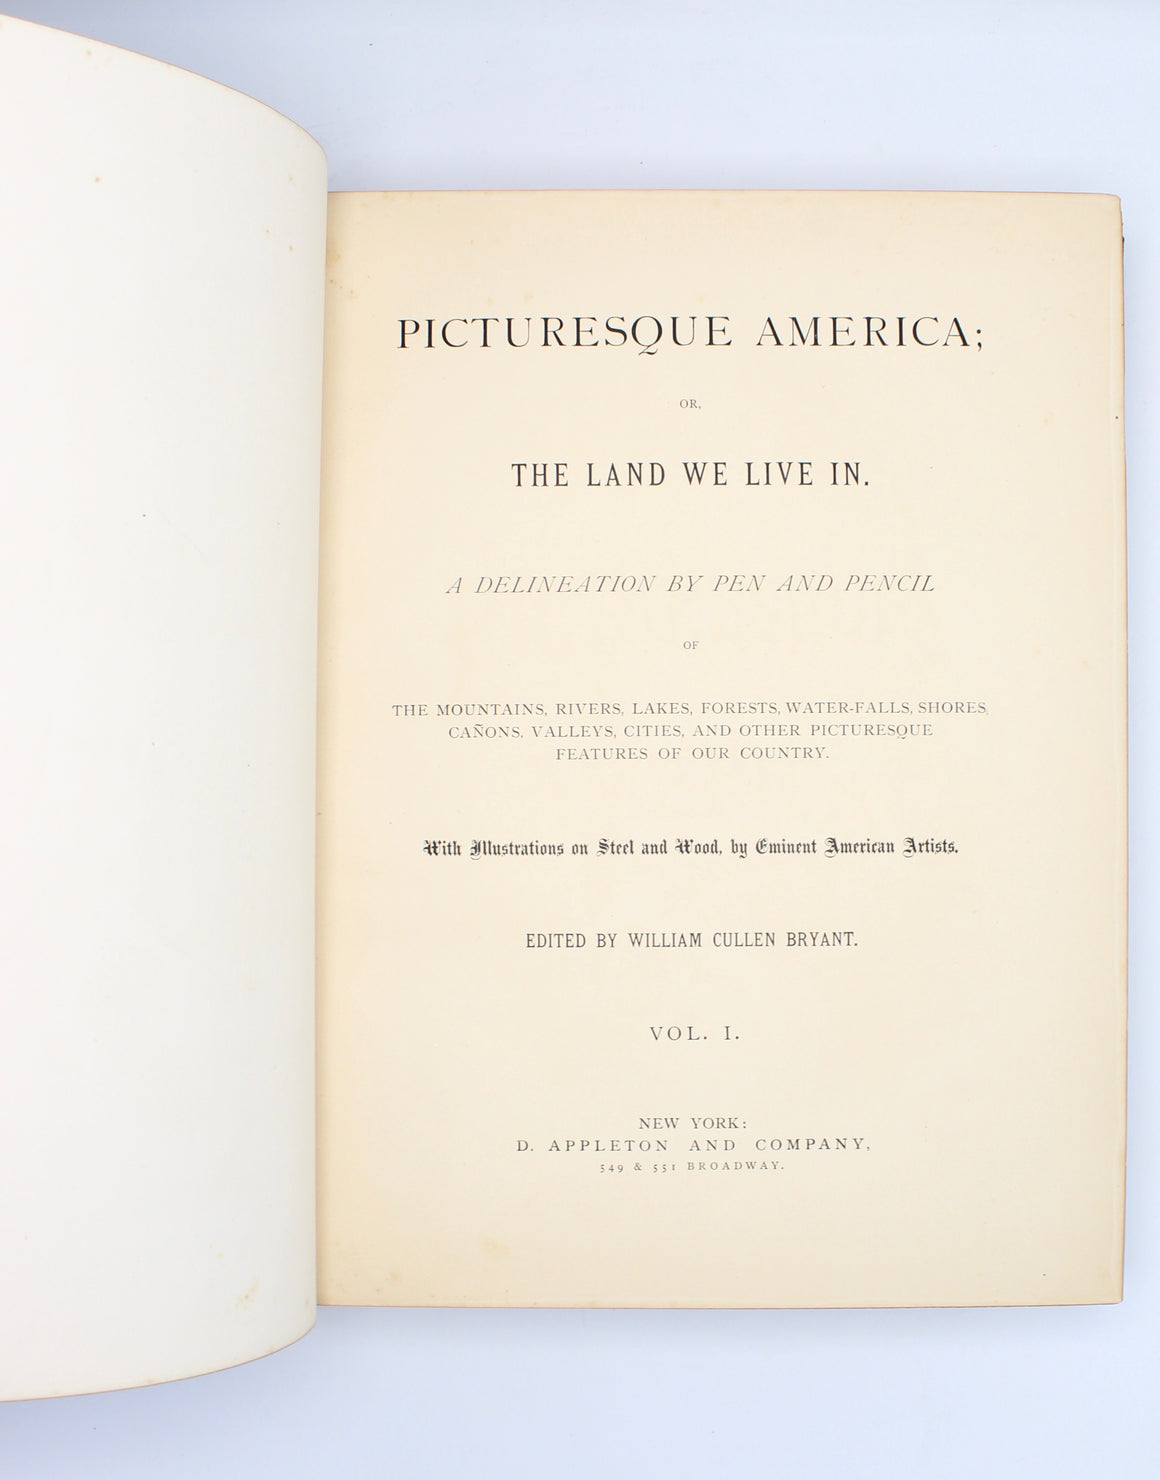 Picturesque America, or The Land we Live In, Edited by William Cullen Bryant, 2 Vol Set, 1872, 1874.